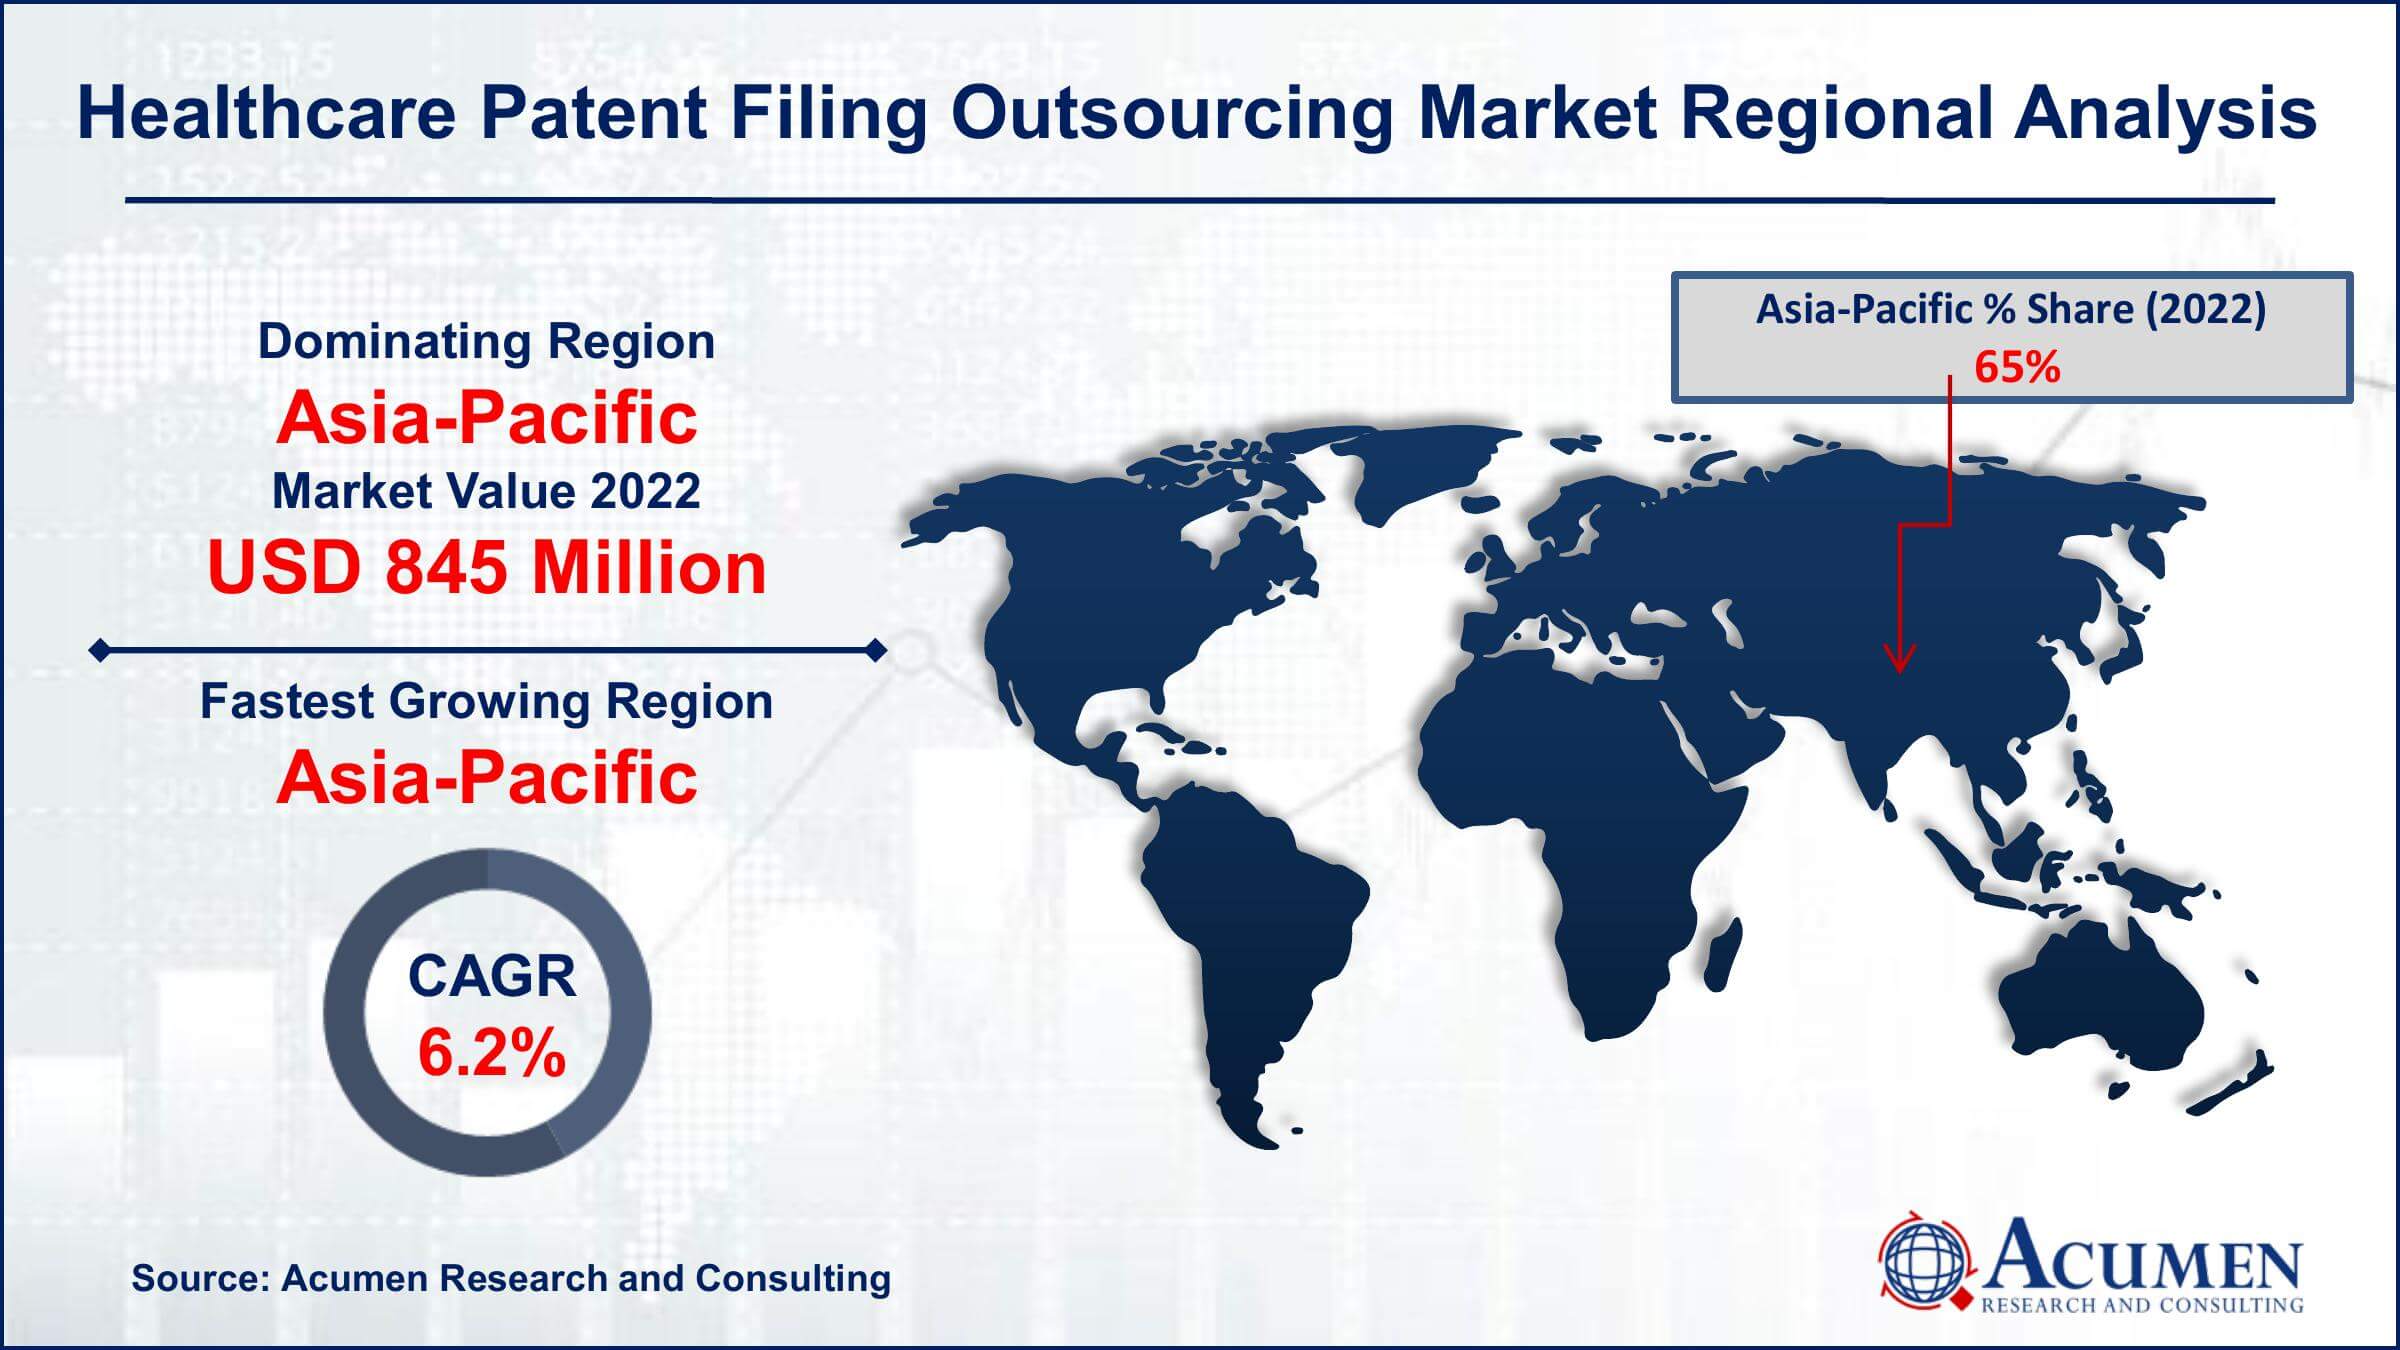 Healthcare Patent Filing Outsourcing Market Drivers